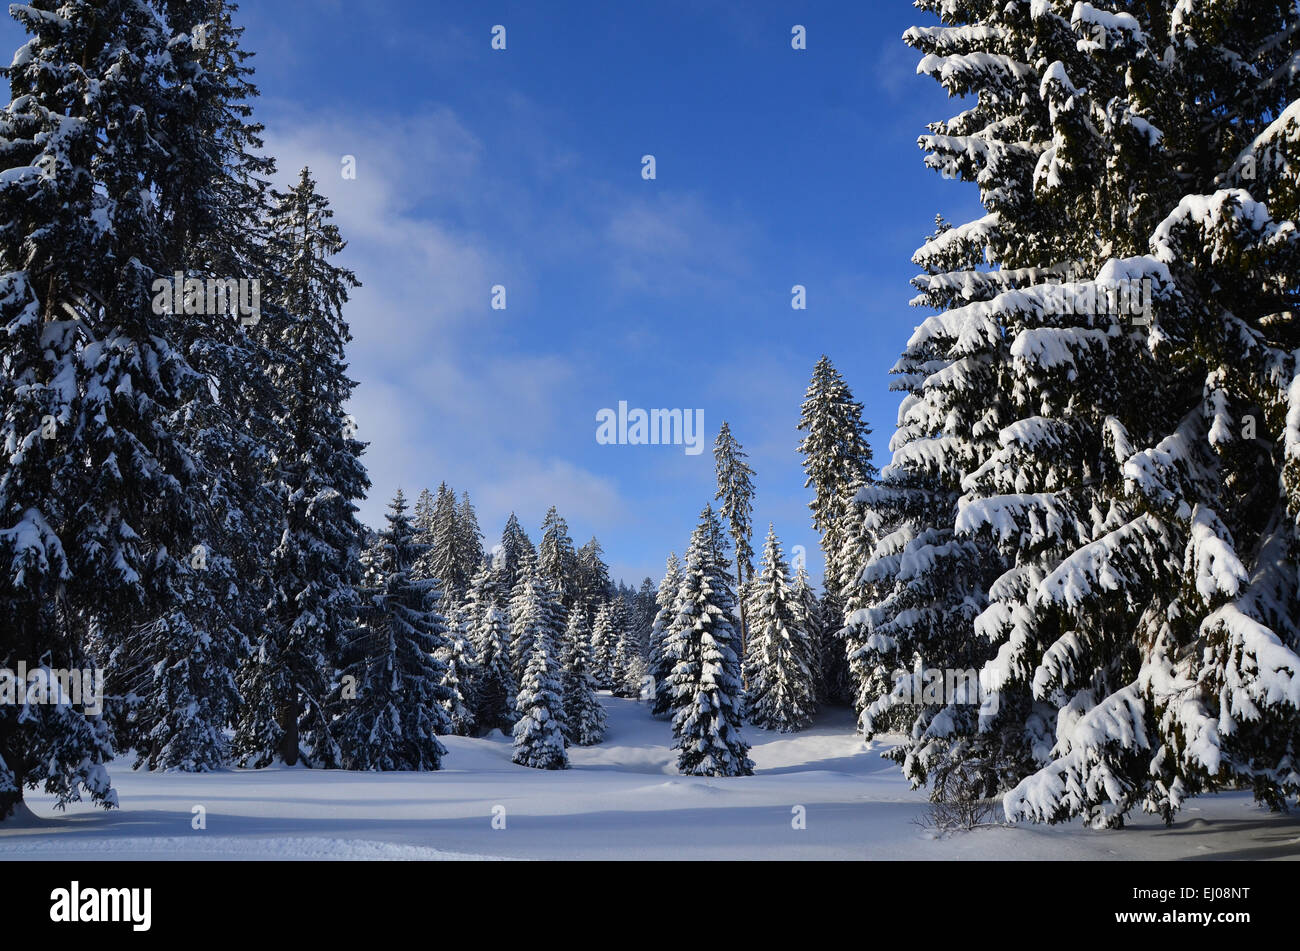 Switzerland, Europe, Jura, Freiberge, Franches Montagnes, Les Genevez, winter, snow, trees, firs Stock Photo